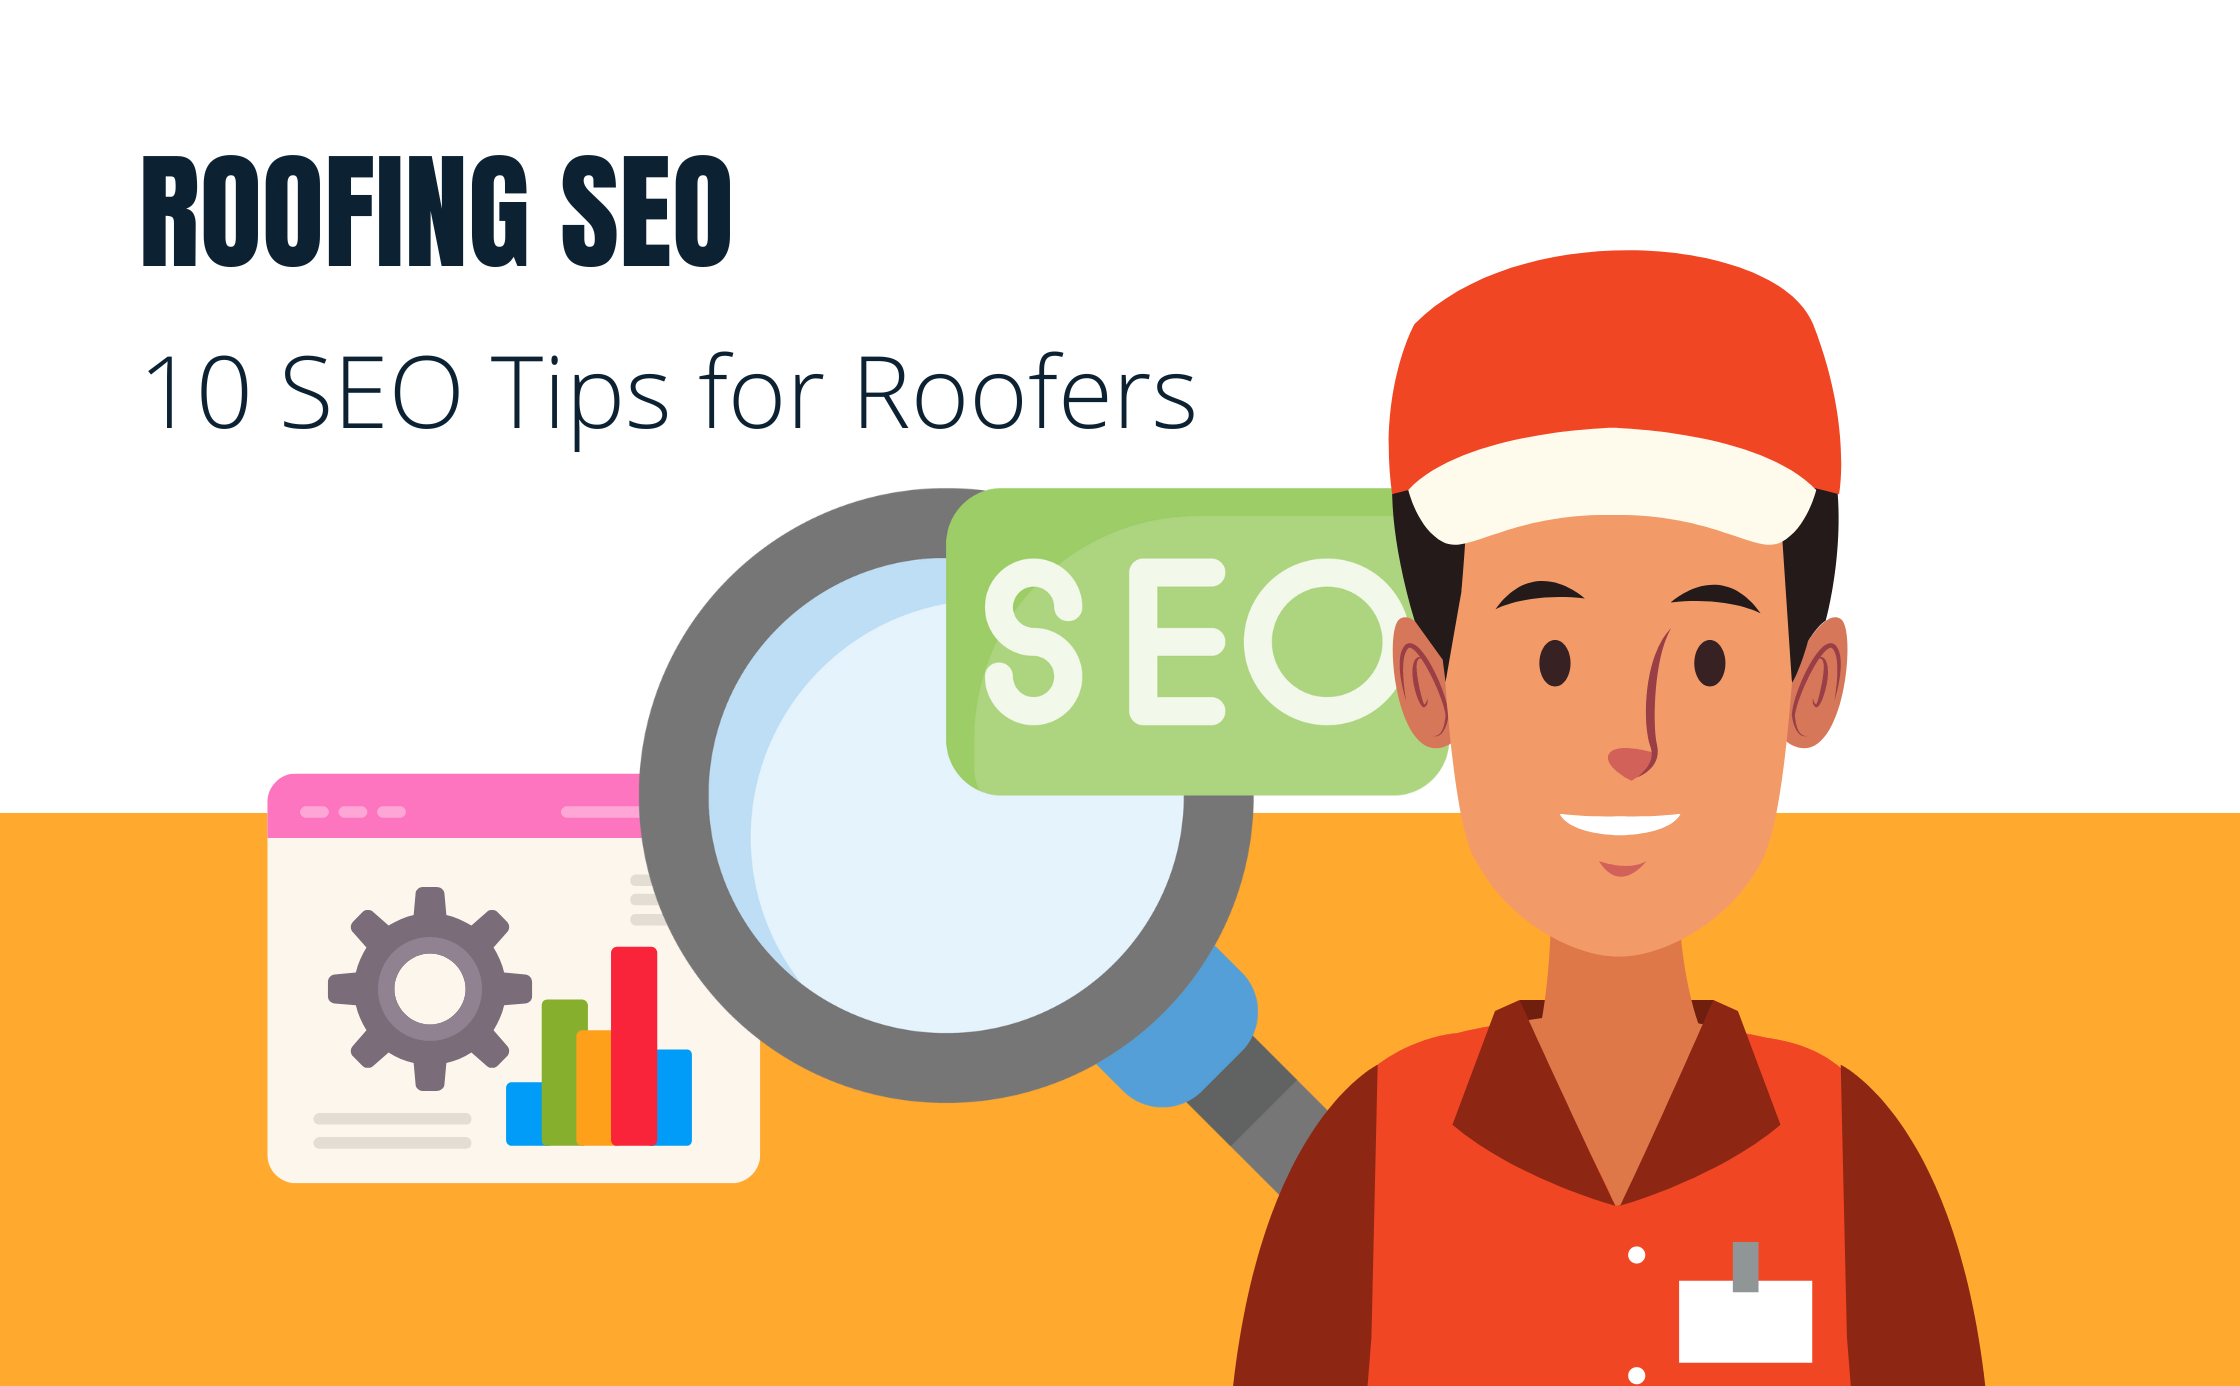 Roofing SEO: 10 SEO Tips for Roofers